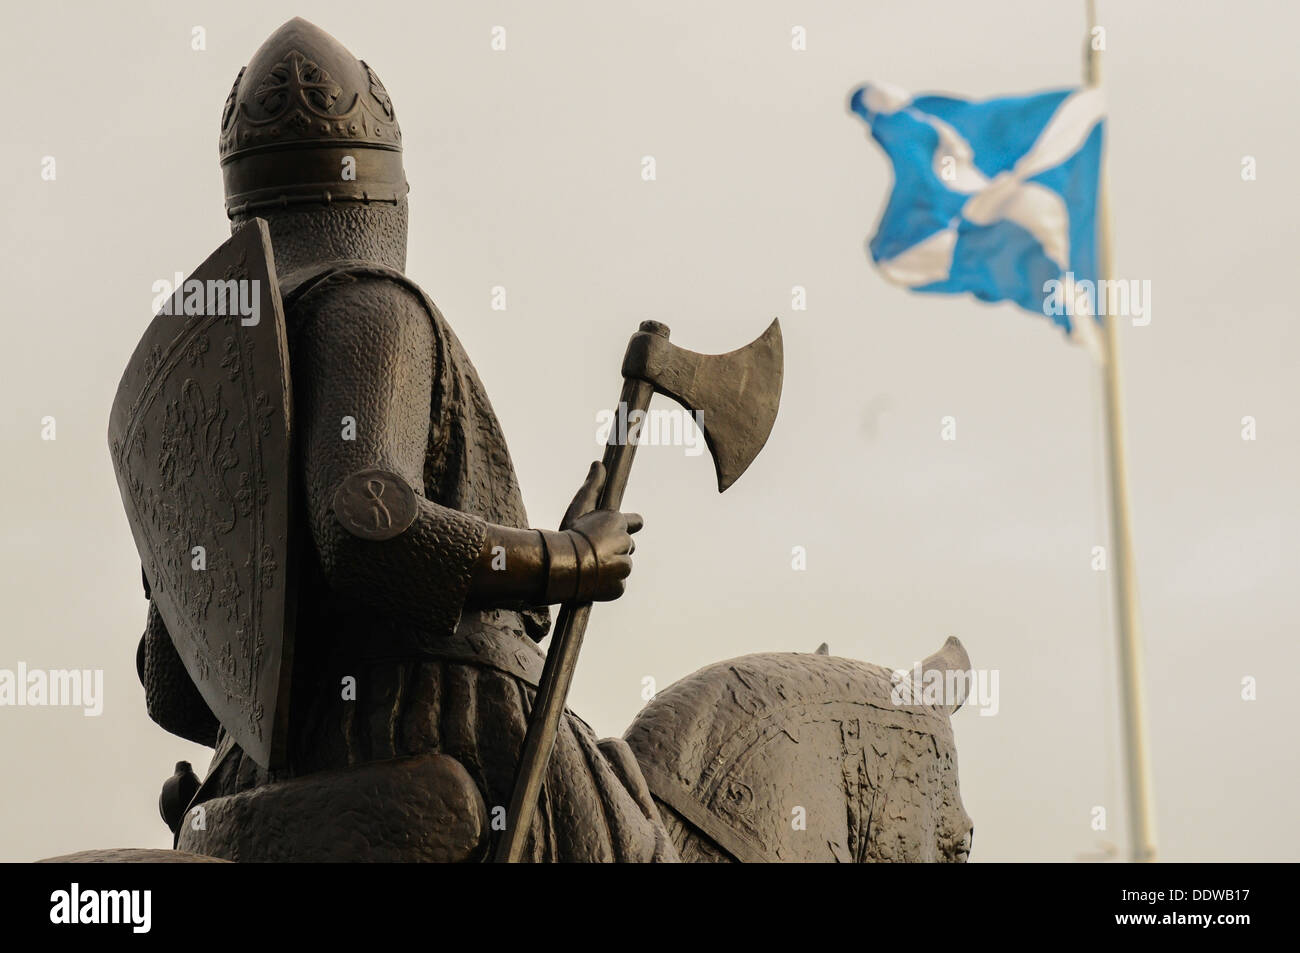 Statue of King Robert the Bruce at the Heritage Centre, Bannockburn, Stirling, Scotland, UK. Silhouette of the statue. Stock Photo